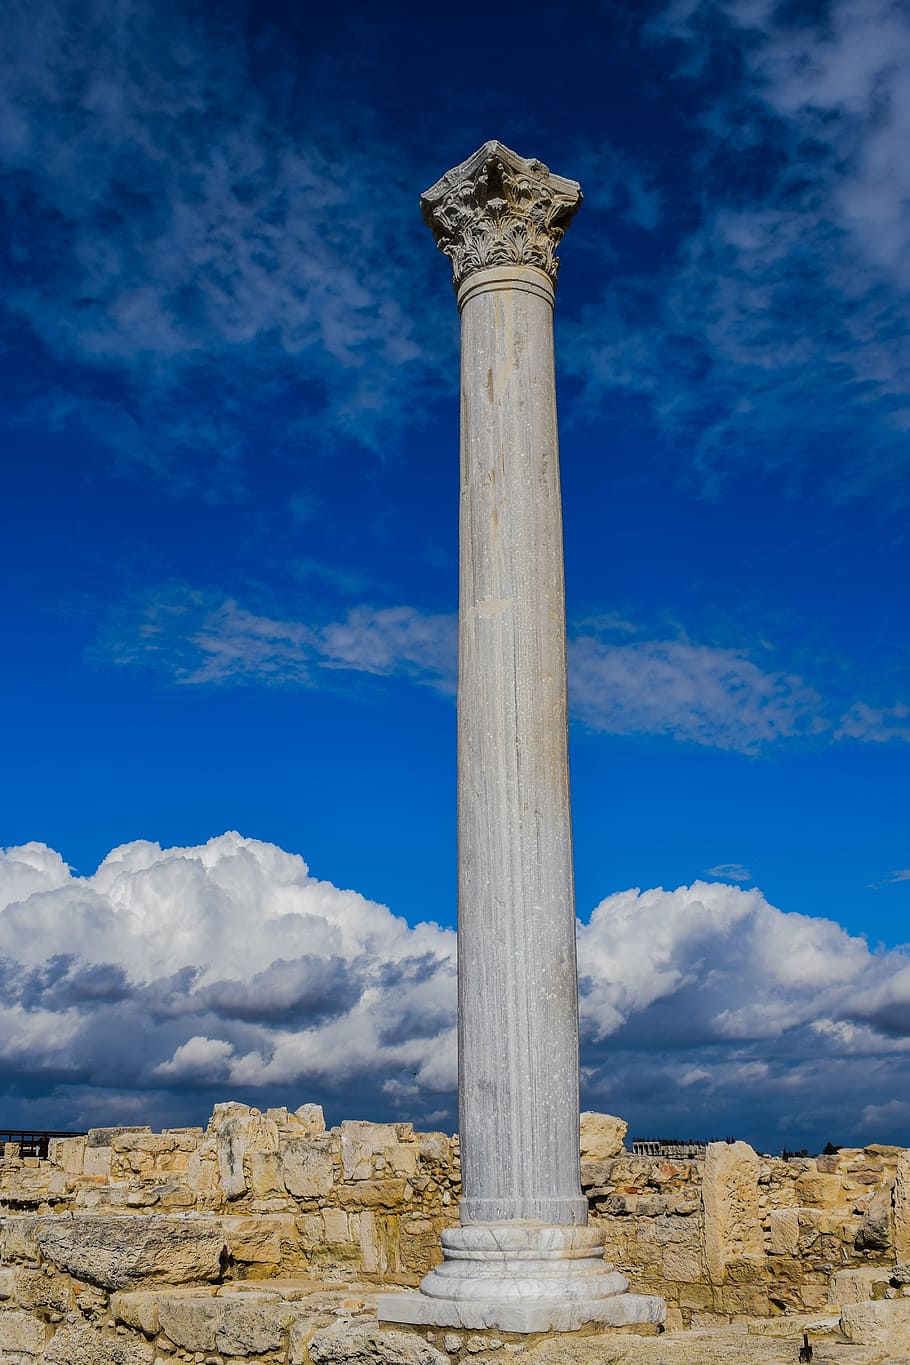 gray concrete monument under blue sky at daytime, cyprus, kourion, HD wallpaper